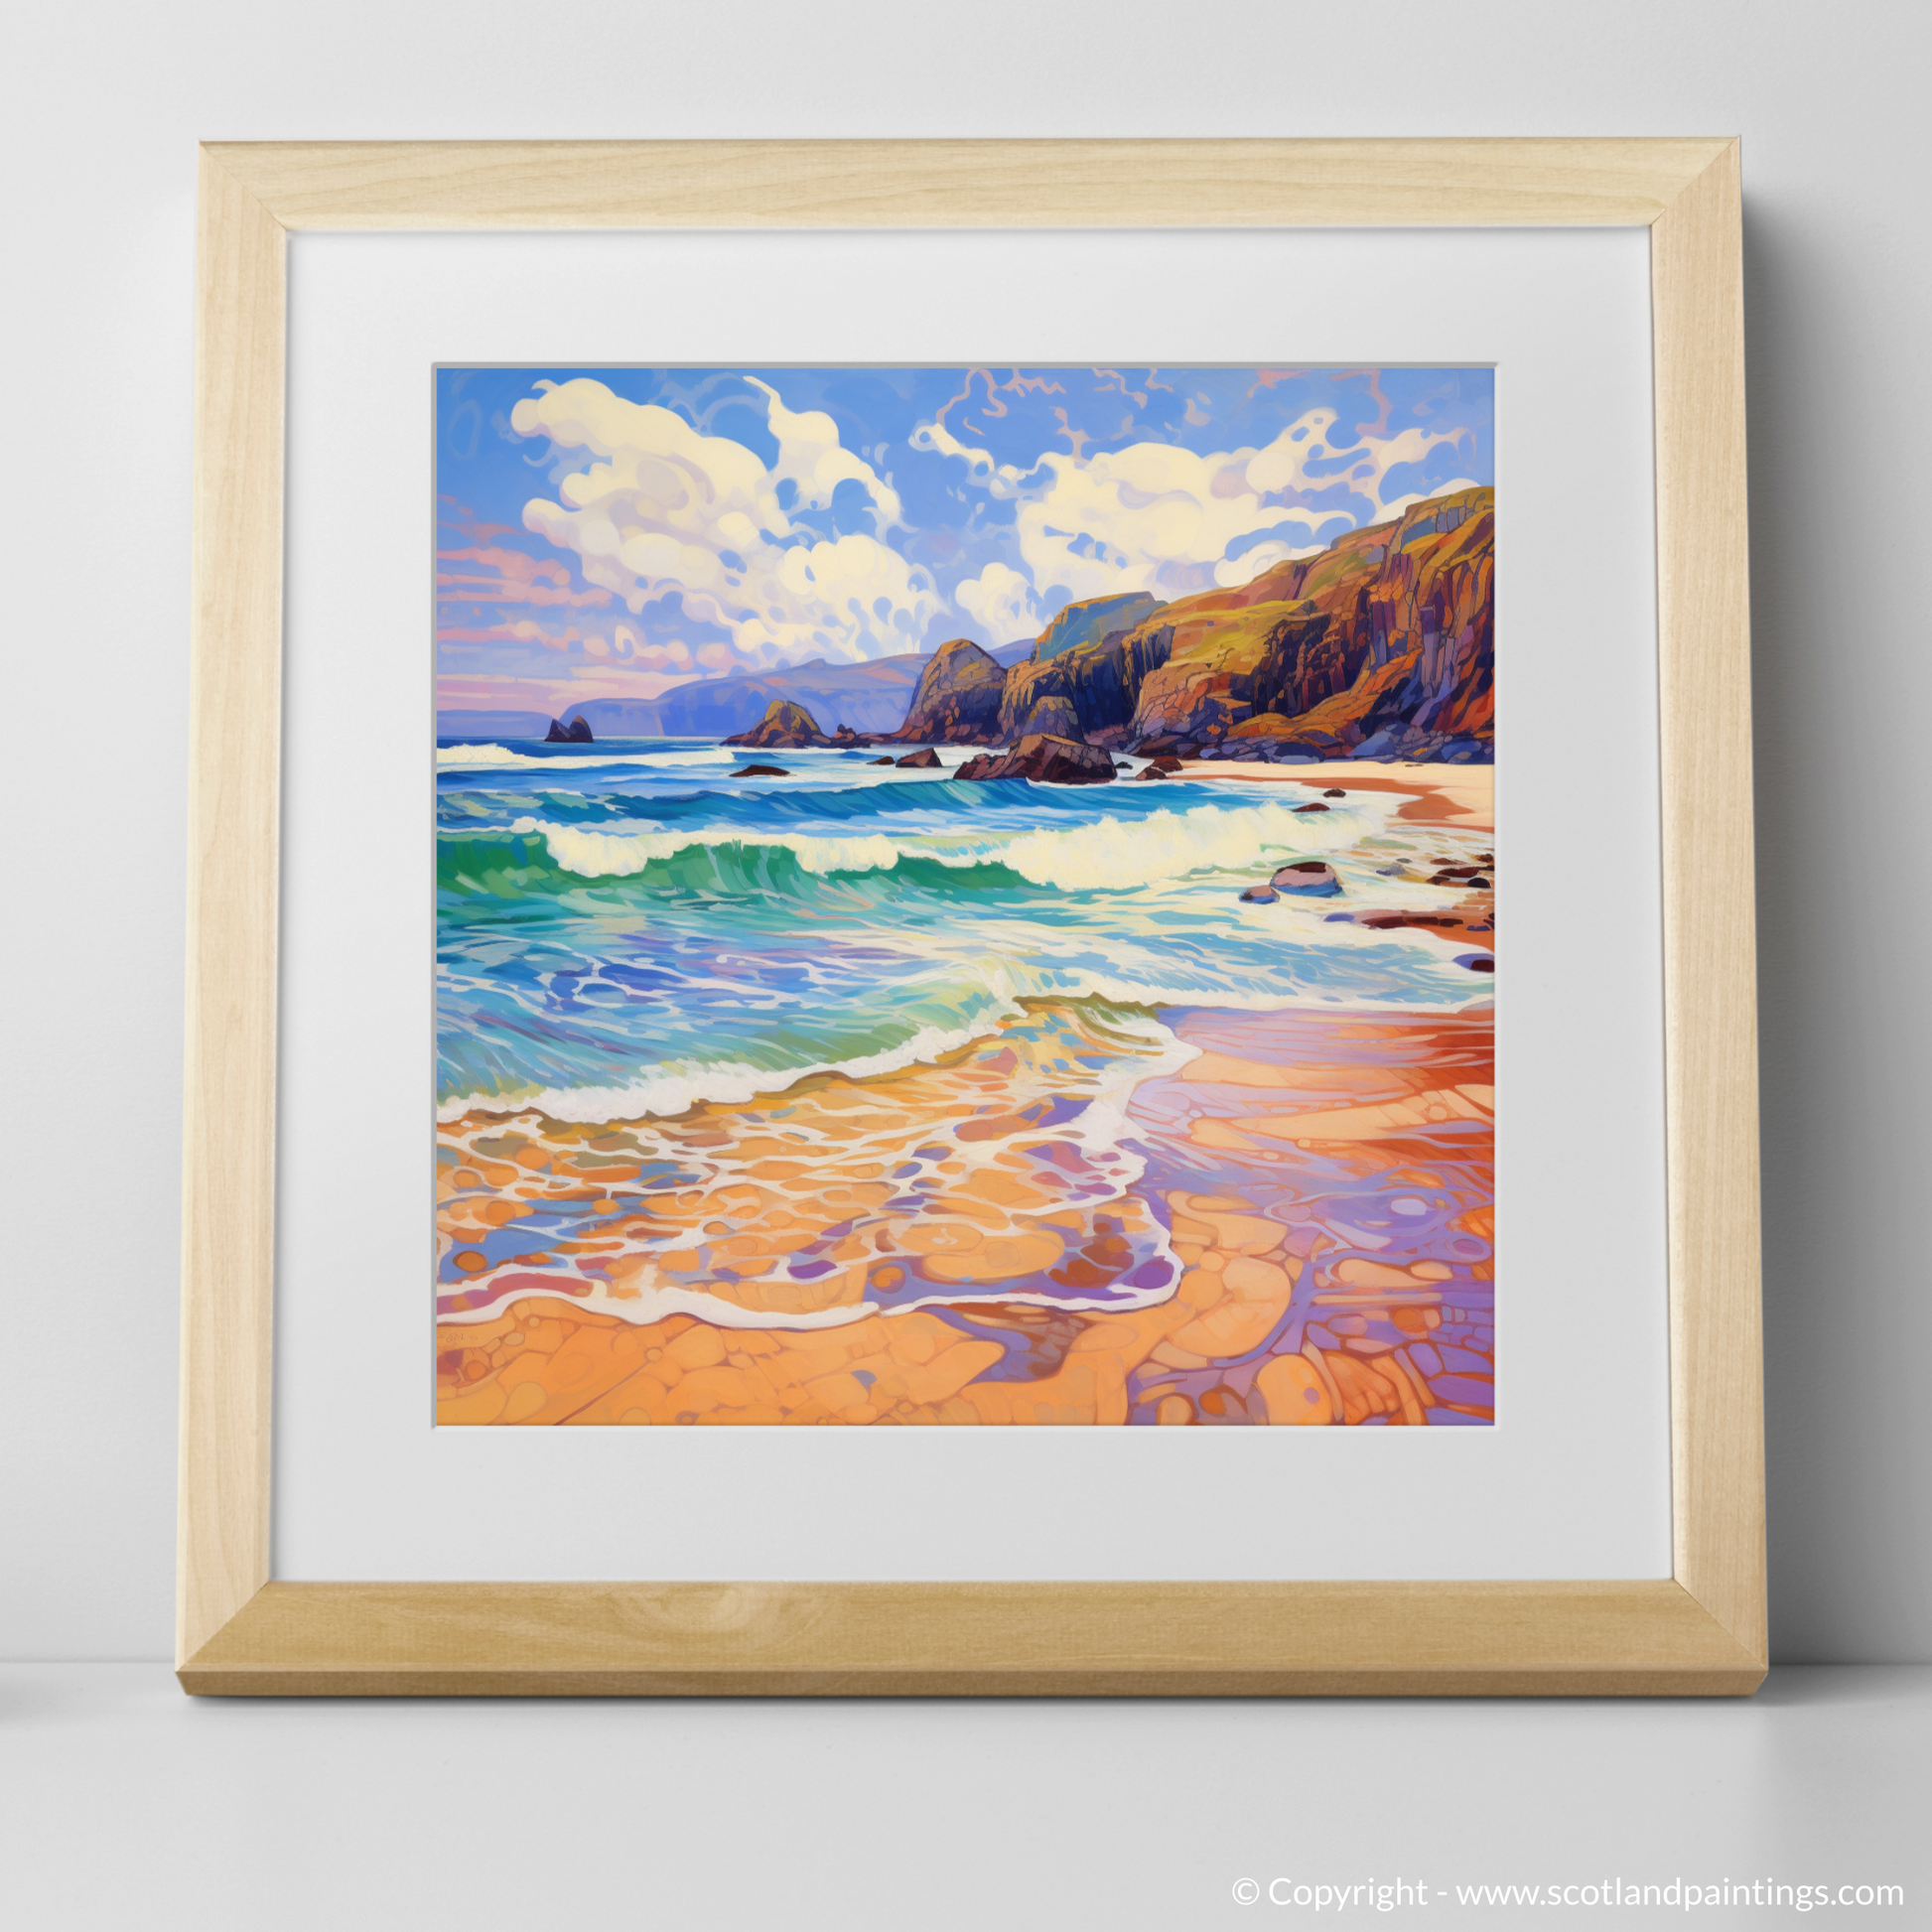 Art Print of Durness Beach, Sutherland in summer with a natural frame